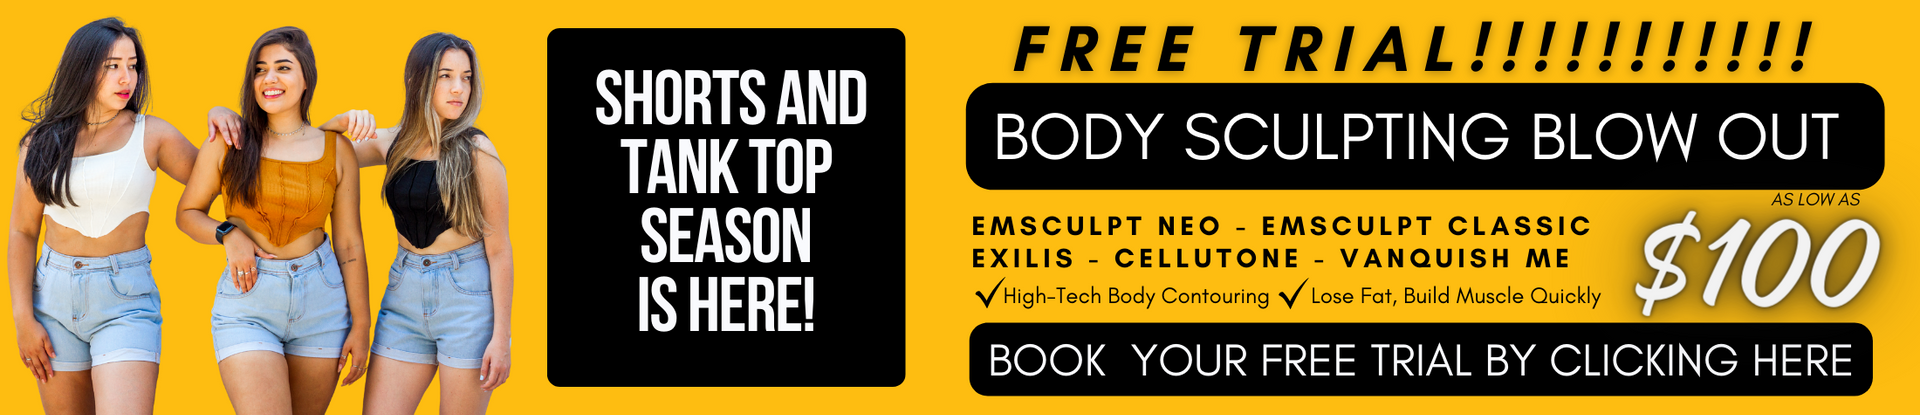 all body sculpting on sale at 
Dr. Mantor's Wrinkle and Weight Solutions, LLC in Westerville, Ohio